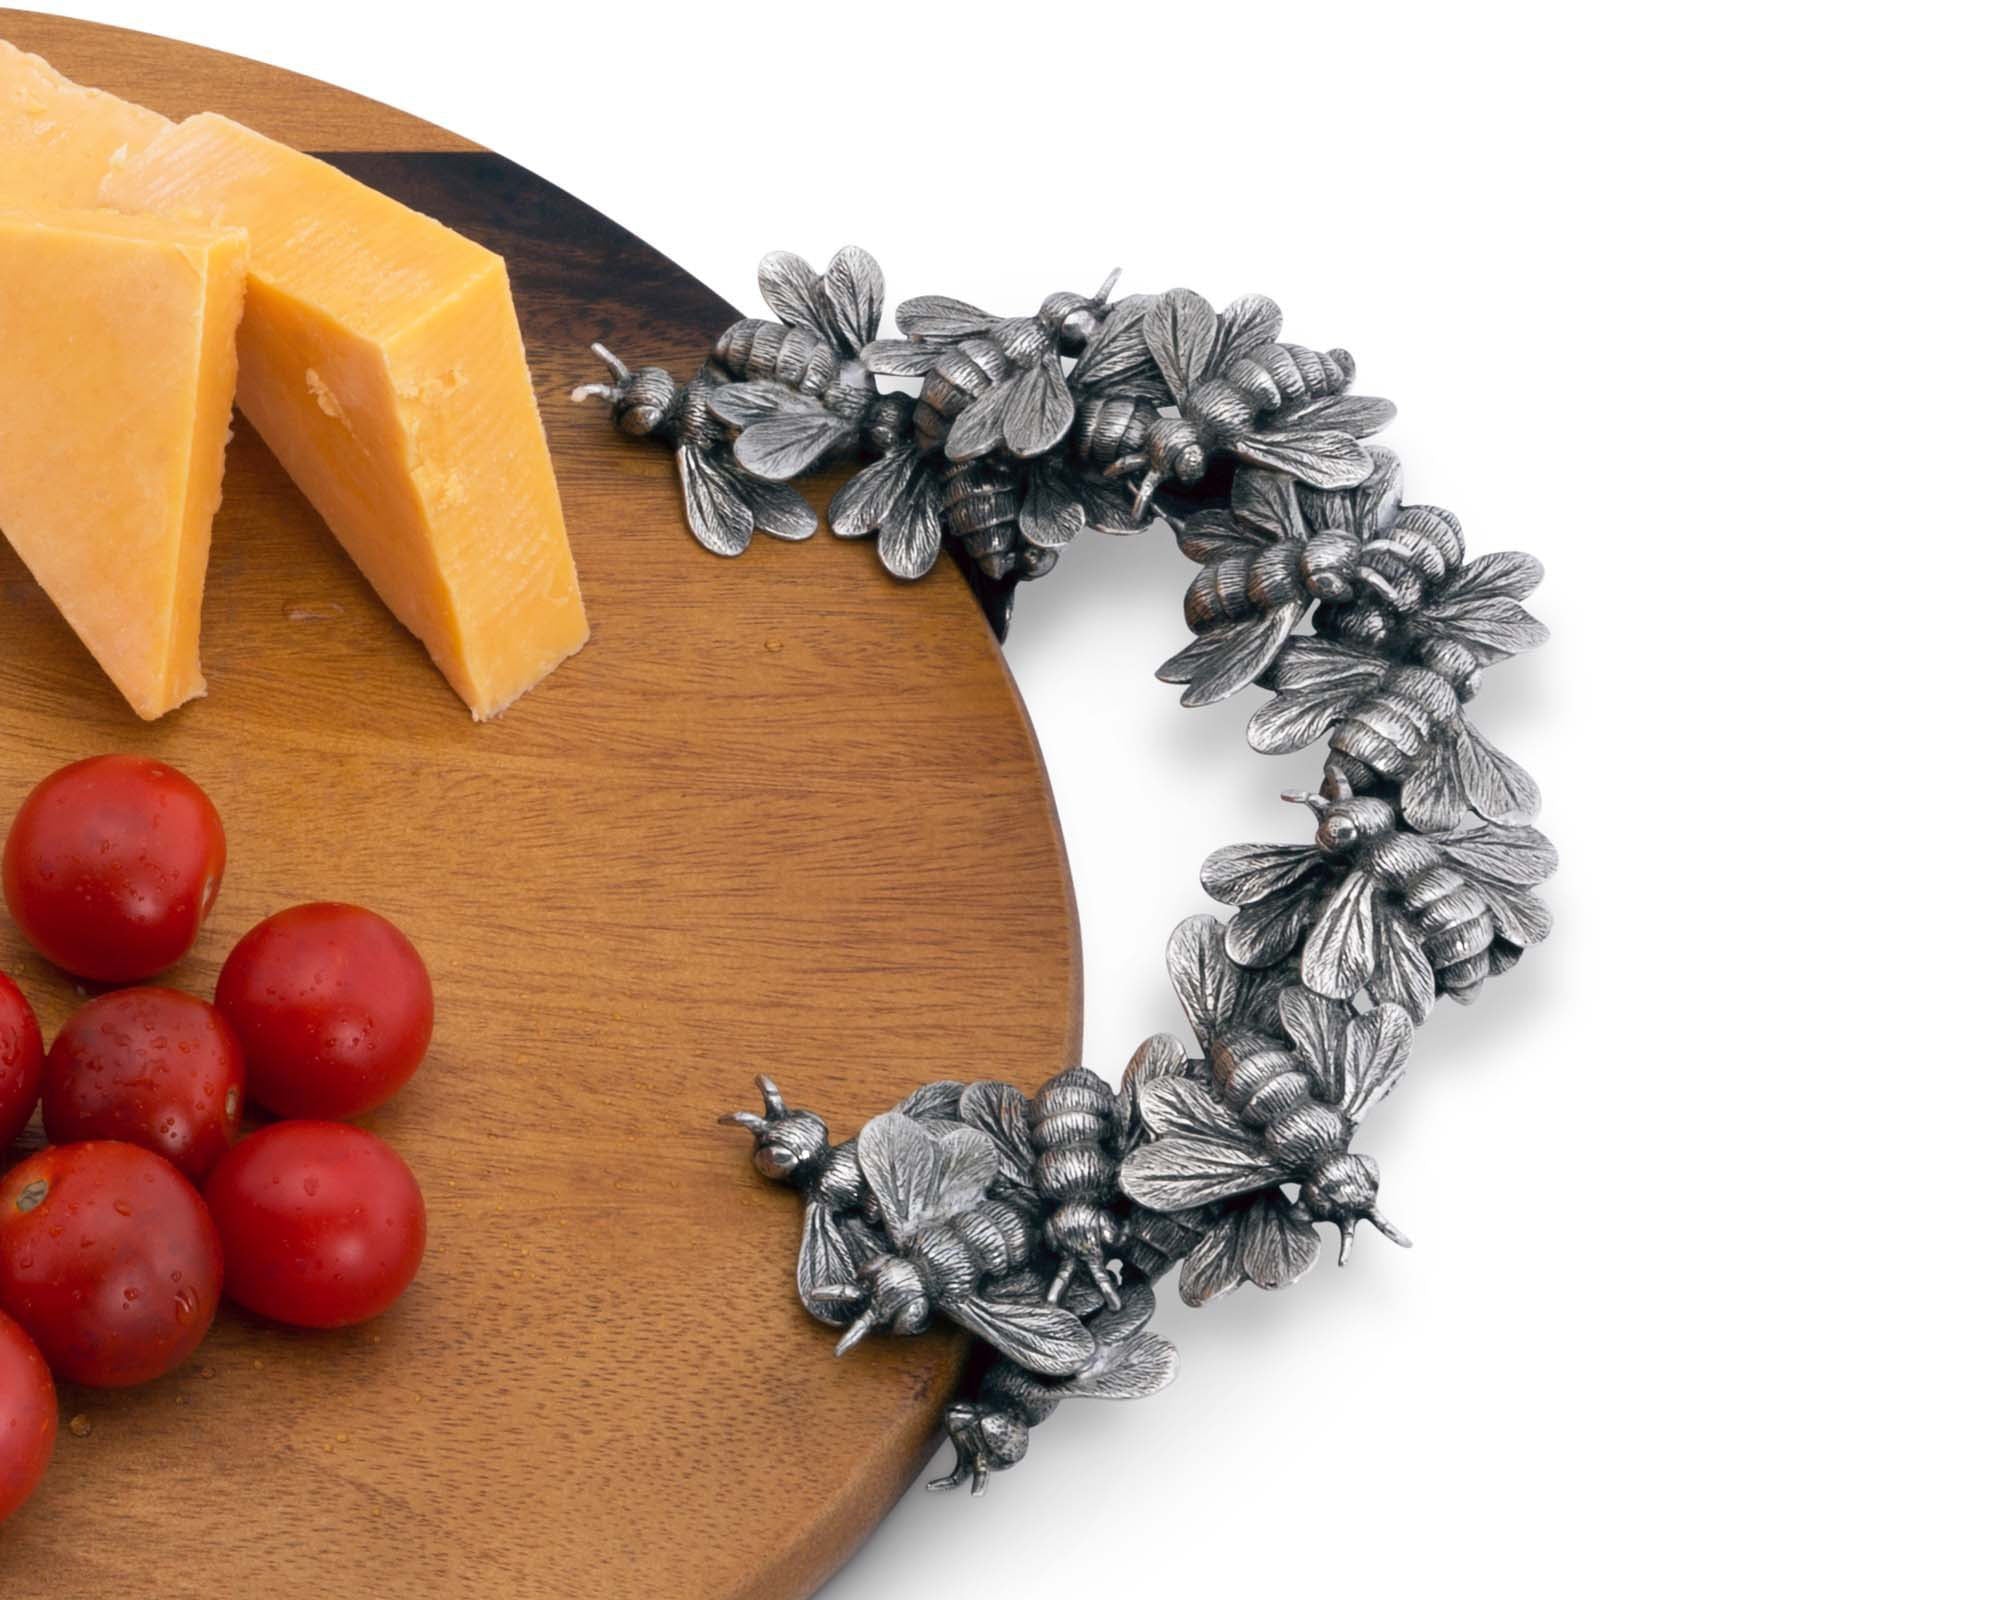 Vagabond House Arche of Bee Oval Cheese Tray Product Image